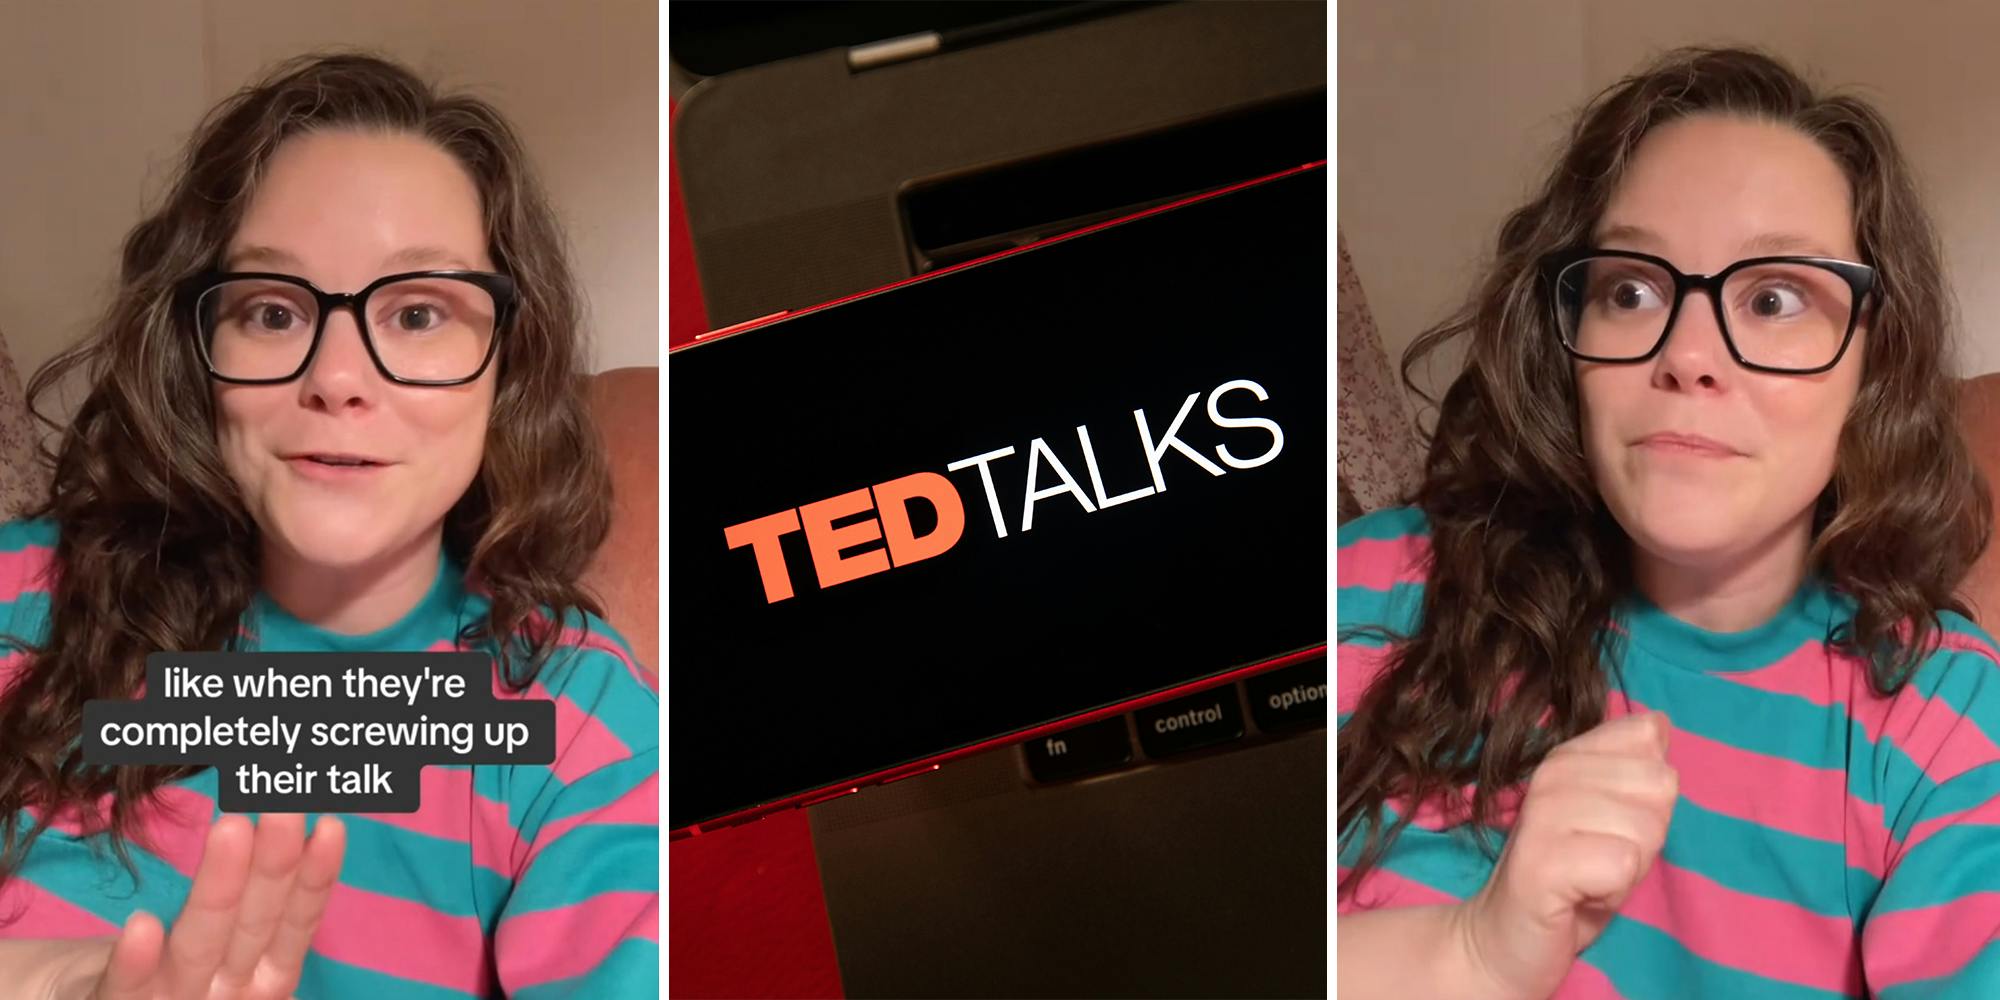 ‘Some of them are total creeps’: Person who used to work for TED Talks dishes about ‘jerks’ who were mean to their assistants